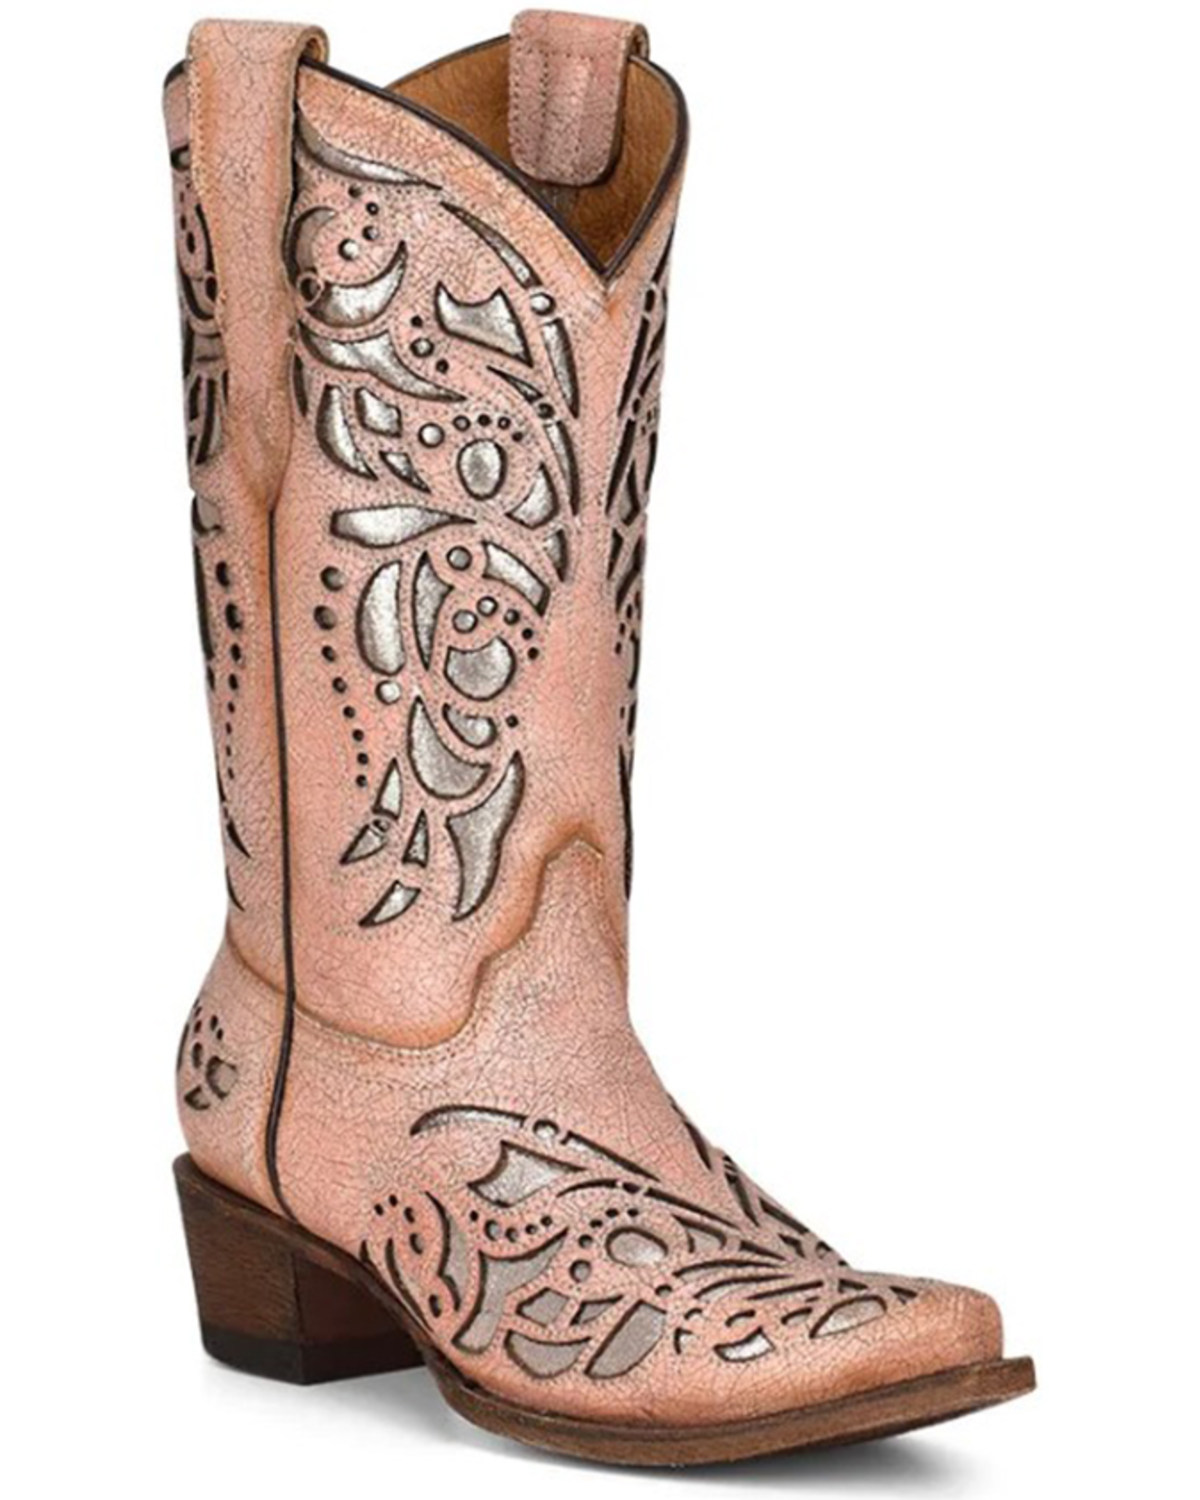 Corral Girls' Inlay & Embroidery Western Boots - Snip Toe